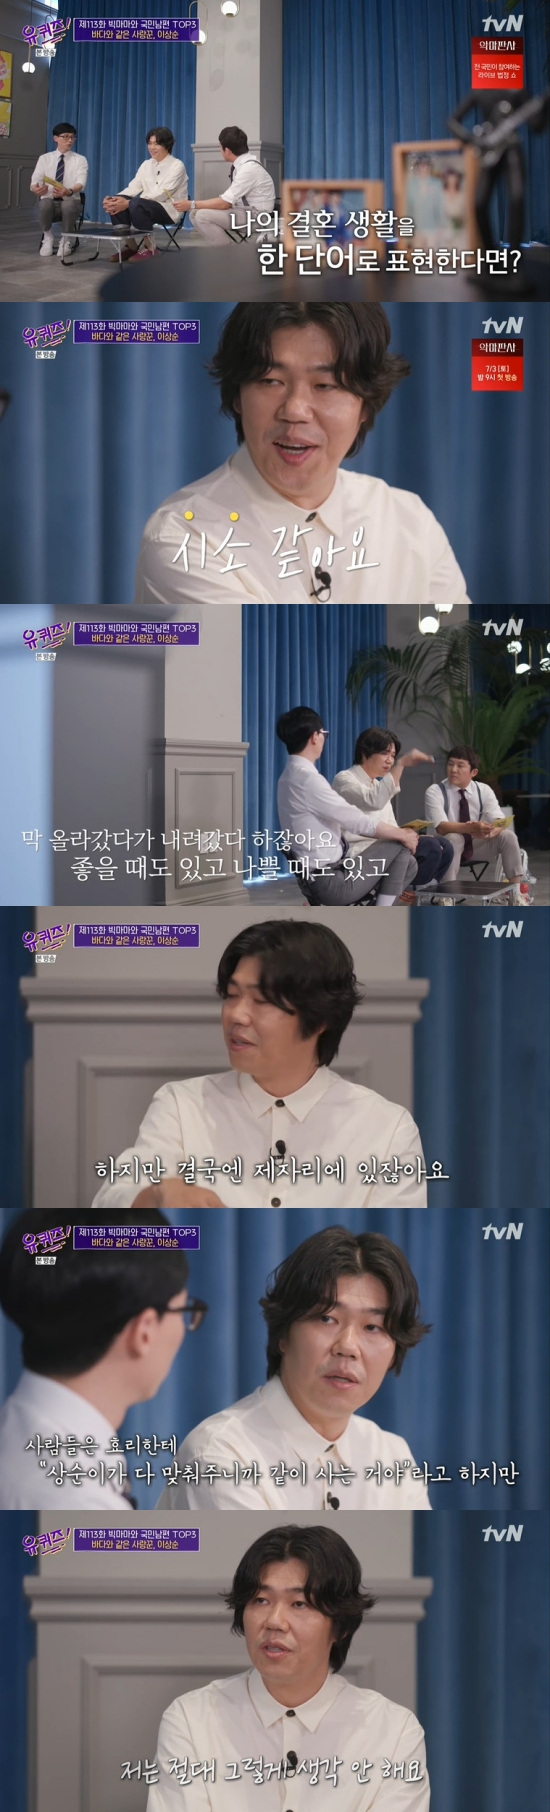 On the 30th TVN You Quiz on the Block, Big Mama and the Korean husband TOP3 featured on the feature, Lee Sang-soon appeared as a guest.On the day, Yoo Jae-Suk said, The most marriage man in Korea.I listen to this, Jo Se-ho said, When the story of marriage came out, it was the object of envy of many people. Lee Sang-soon said: There was envy, but there was also jealousy, period.Hyori fans recalled, I came out with such a listener and received a lot of such criticisms about our Hyori sister, why our Hyori sister.Furthermore, Lee Sang-soon said, The people around me have said a lot of such stories. Life is like, What? You and Hyori?We received a visit until we saw our life with Hyoris guest house.Jo Se-ho asked, When do you think of your wife? Lee Sang-soon said, Every big event starts with a very small event and comes to mind when it happens in everyday life.Lee Sang-soon said, I have to talk to this kid quickly. If I say, I met my brother on the street, hell say, Yeah? Whats he saying?Its so fun to talk with you. Its the best friend. Lee Sang-soon then replied, What if I put my marriage life in one word? to the question, Shiso, Lee Sang-soon said, I go up and down.Sometimes it is good and sometimes it is bad, but it is not in place after all. It seems that such a life that goes back and forth is my marriage life. Yoo Jae-Suk said, I think it is because I hear the word seesaw. I have to try to balance each other.I think Im trying to balance it. In particular, Lee Sang-soon said, People all say to Hyori, Sang Soon-yi gives it all, you do it because Sang Soon does it. But I do not think so at all.Hyori also tries very hard. It is difficult to live in such a stable life without the effort of the two people. Photo = TVN broadcast screen